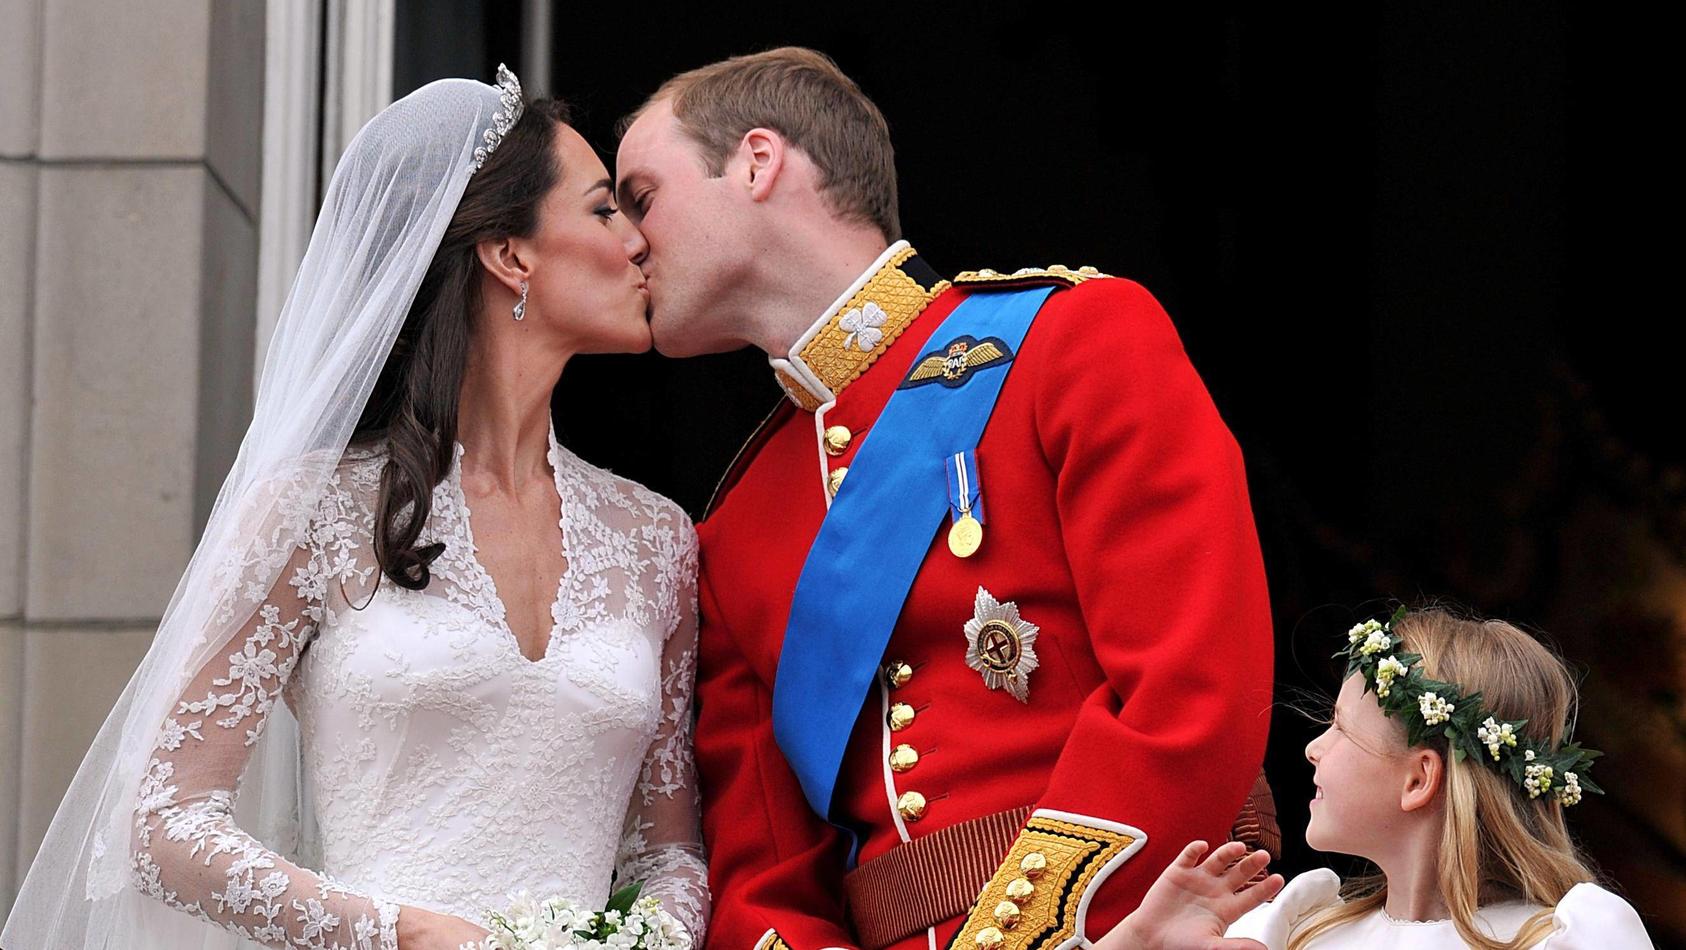 Bildnummer: 55302859  Datum: 29.04.2011  Copyright: imago/Xinhua(110429) -- LONDON, April 29, 2011 (Xinhua) -- Britain s Prince William and his bride Kate Middleton kiss as they stand on the balcony at Buckingham Palace after their wedding in Westmin